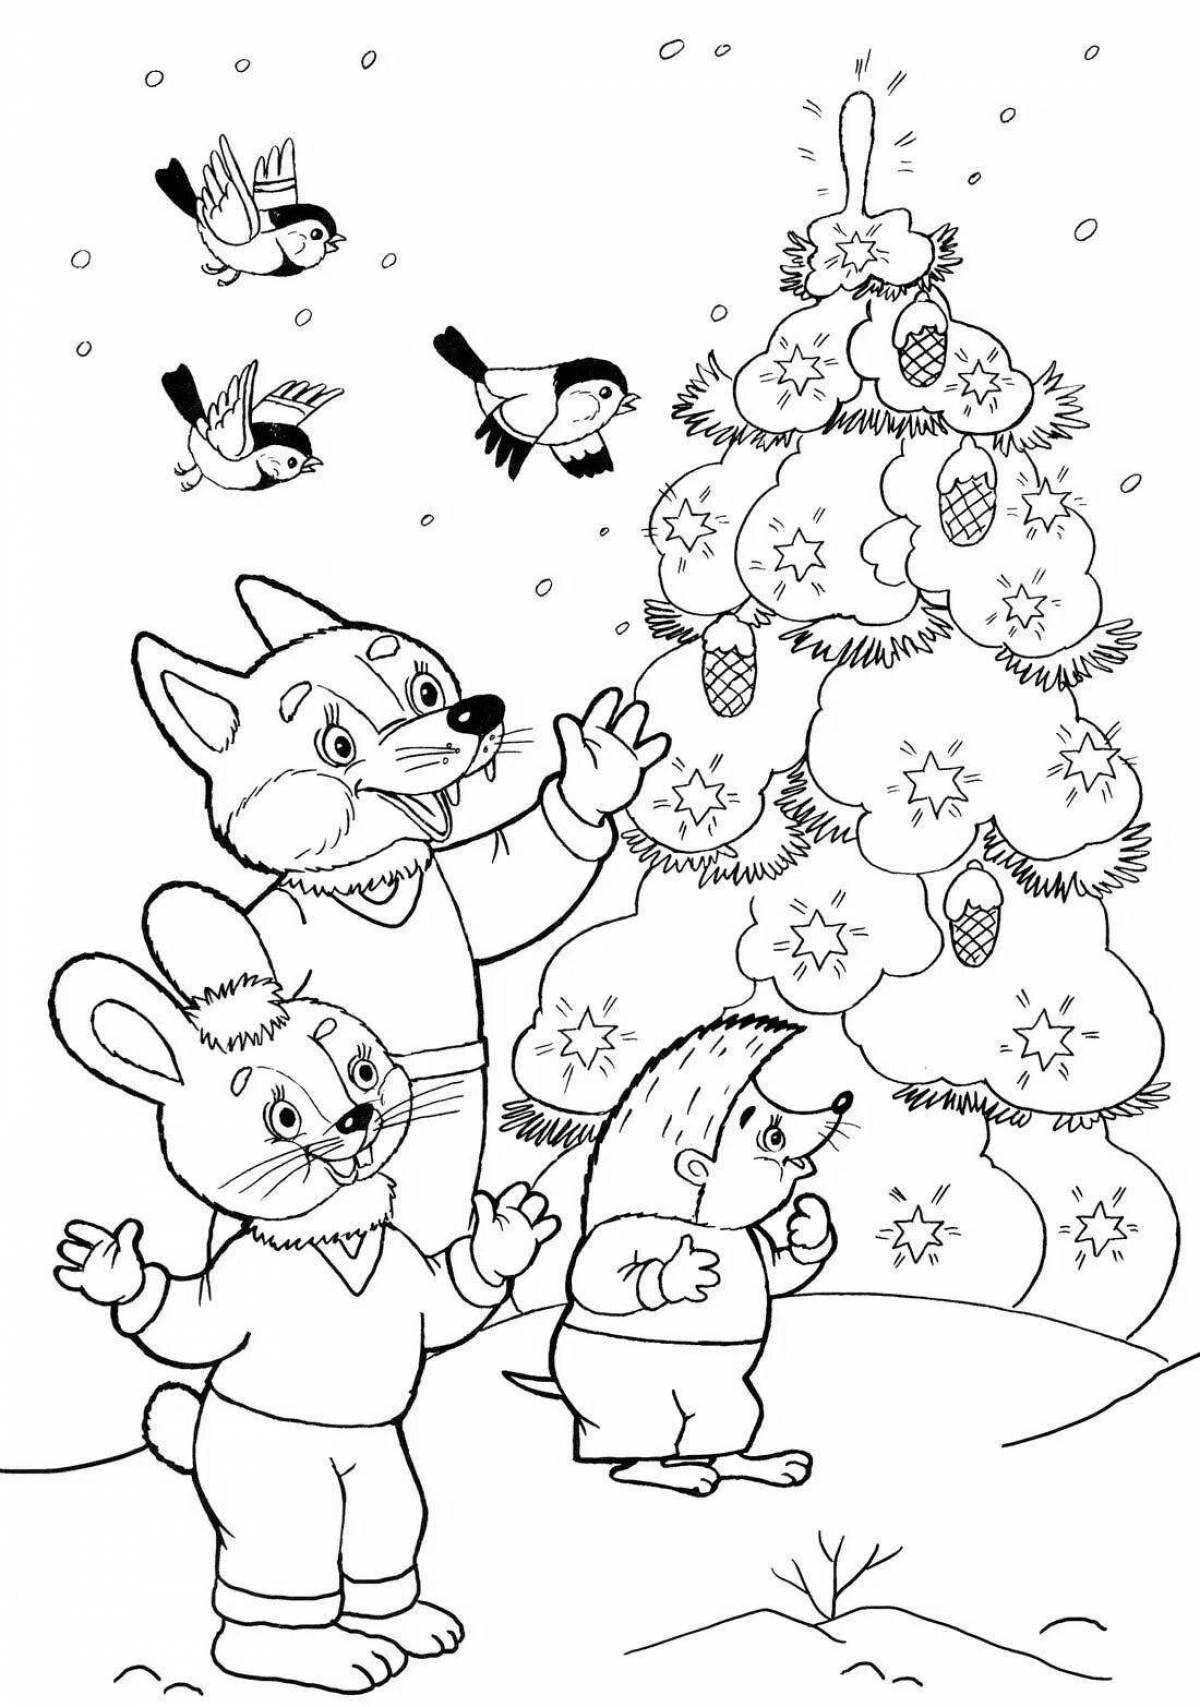 Coloring book radiant hare and tree